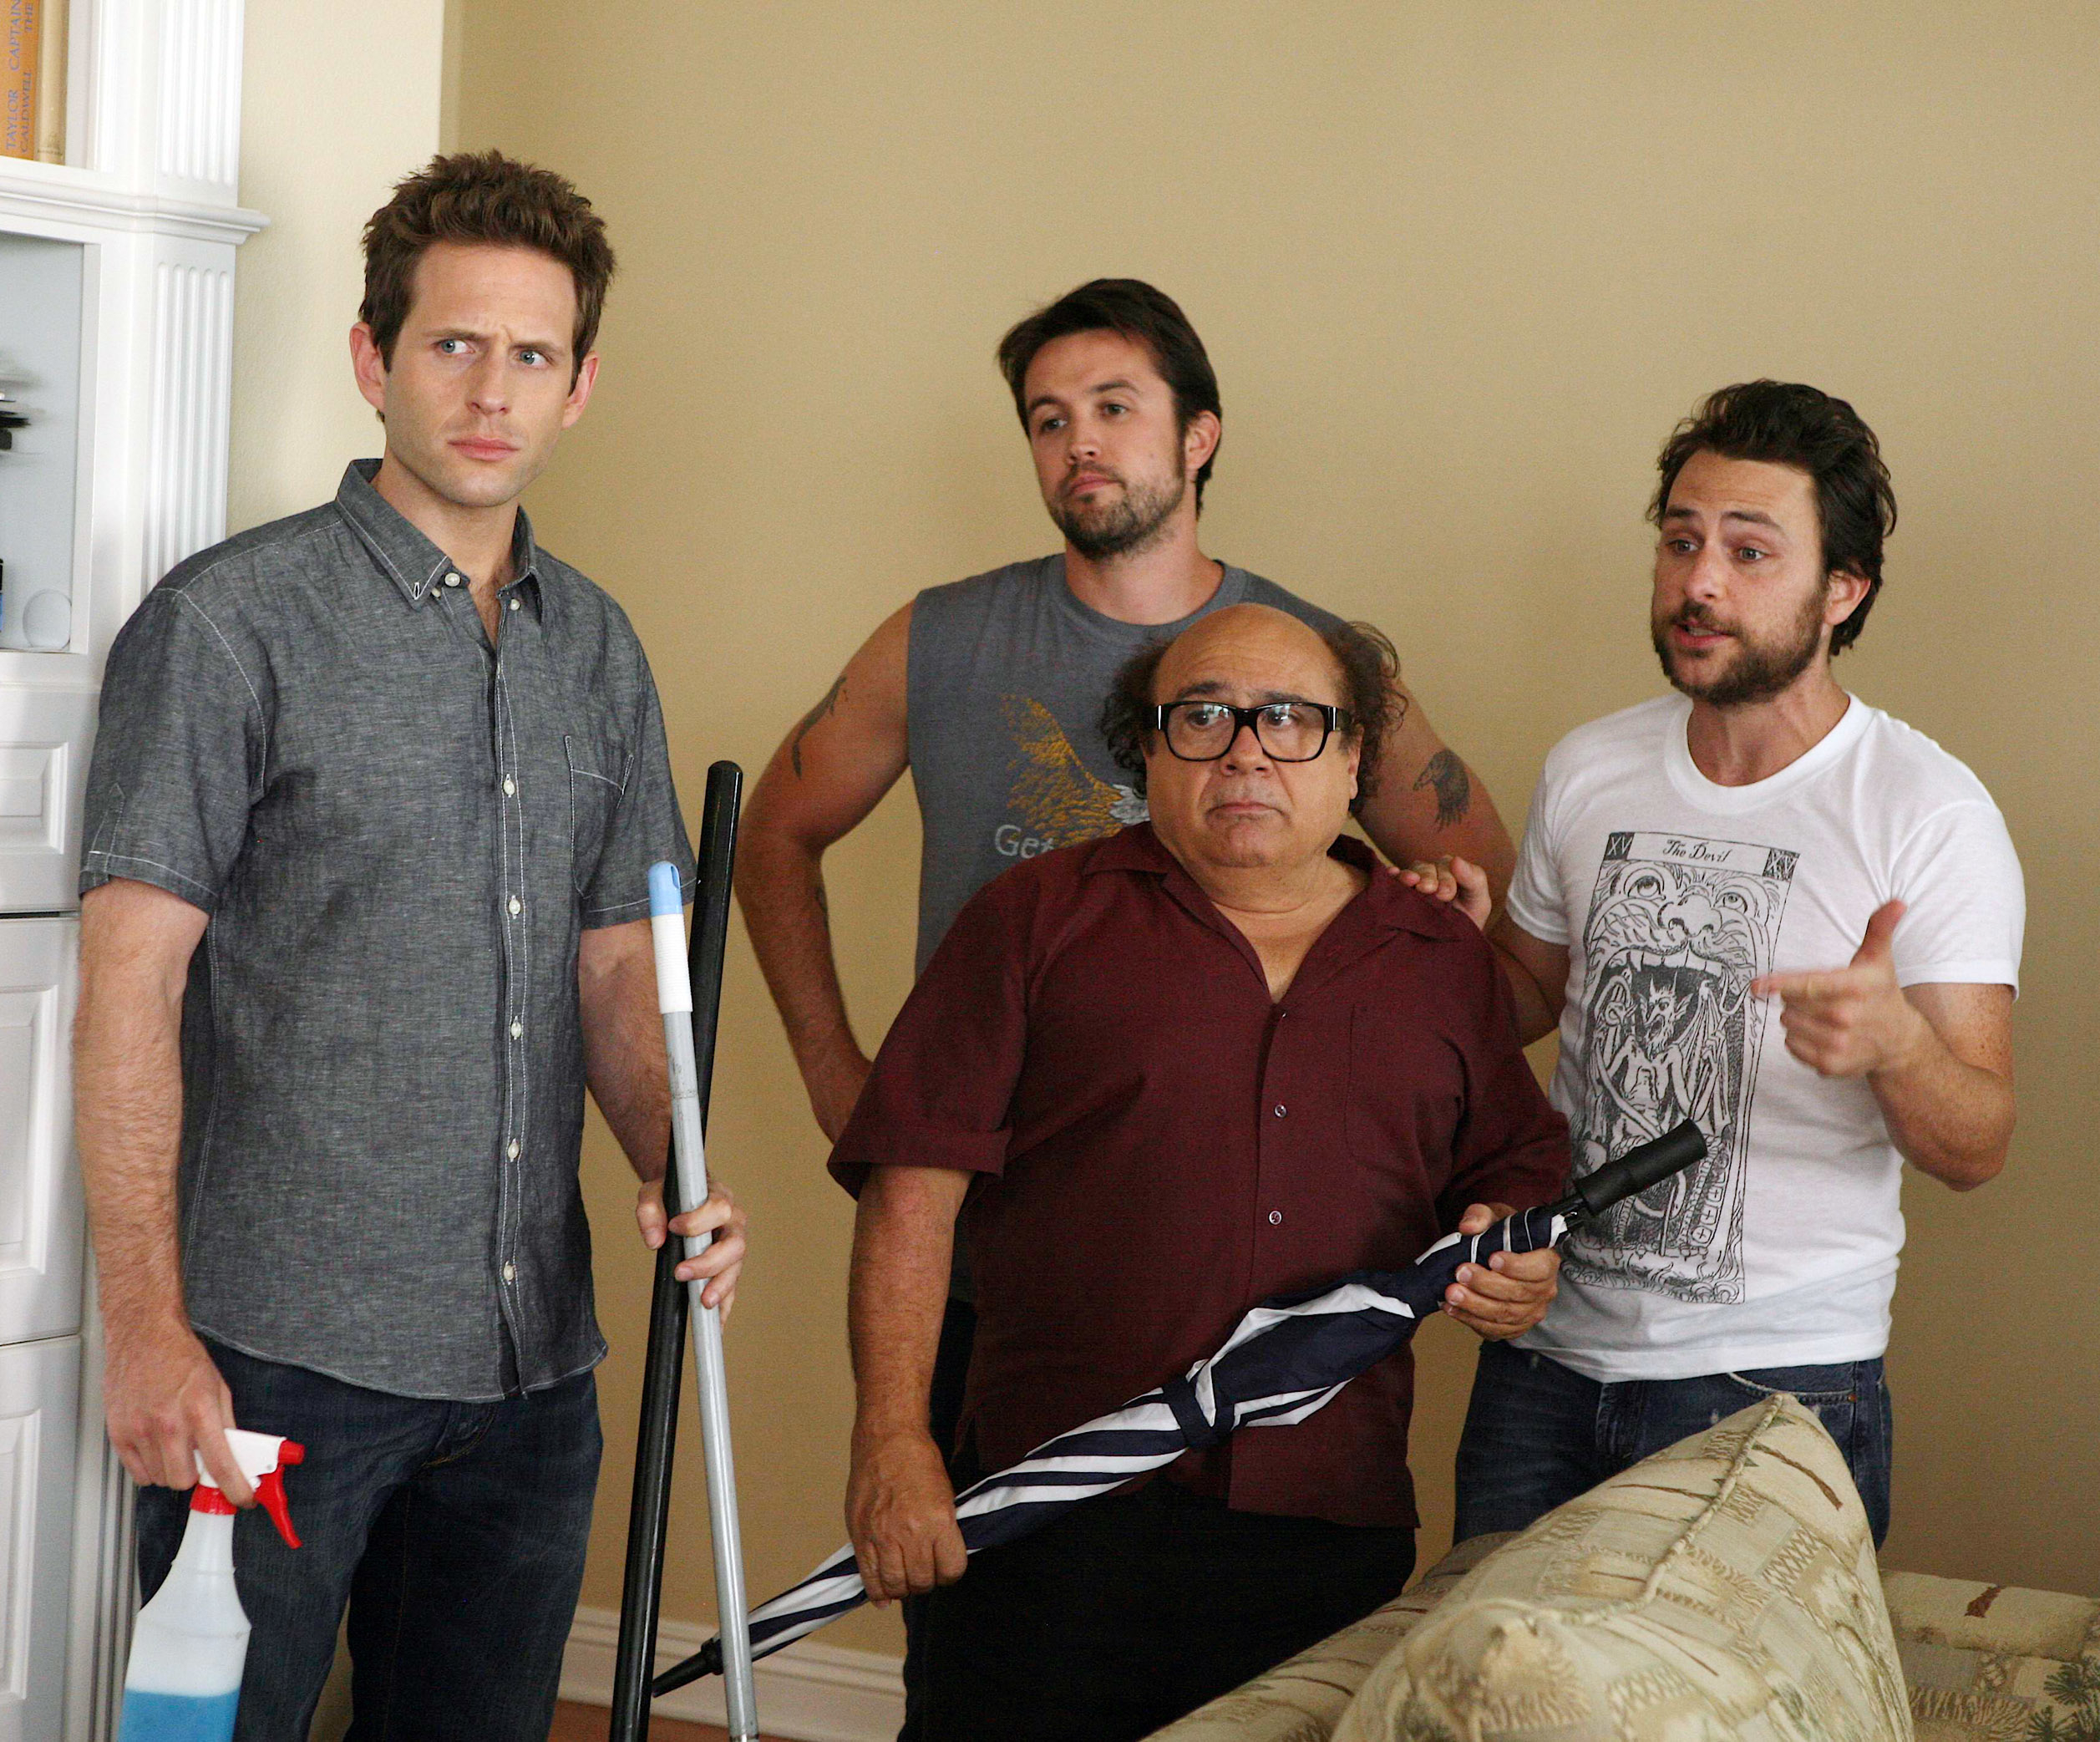 Four characters from the TV show &quot;It&#x27;s Always Sunny in Philadelphia&quot; are shown in a room looking towards the camera